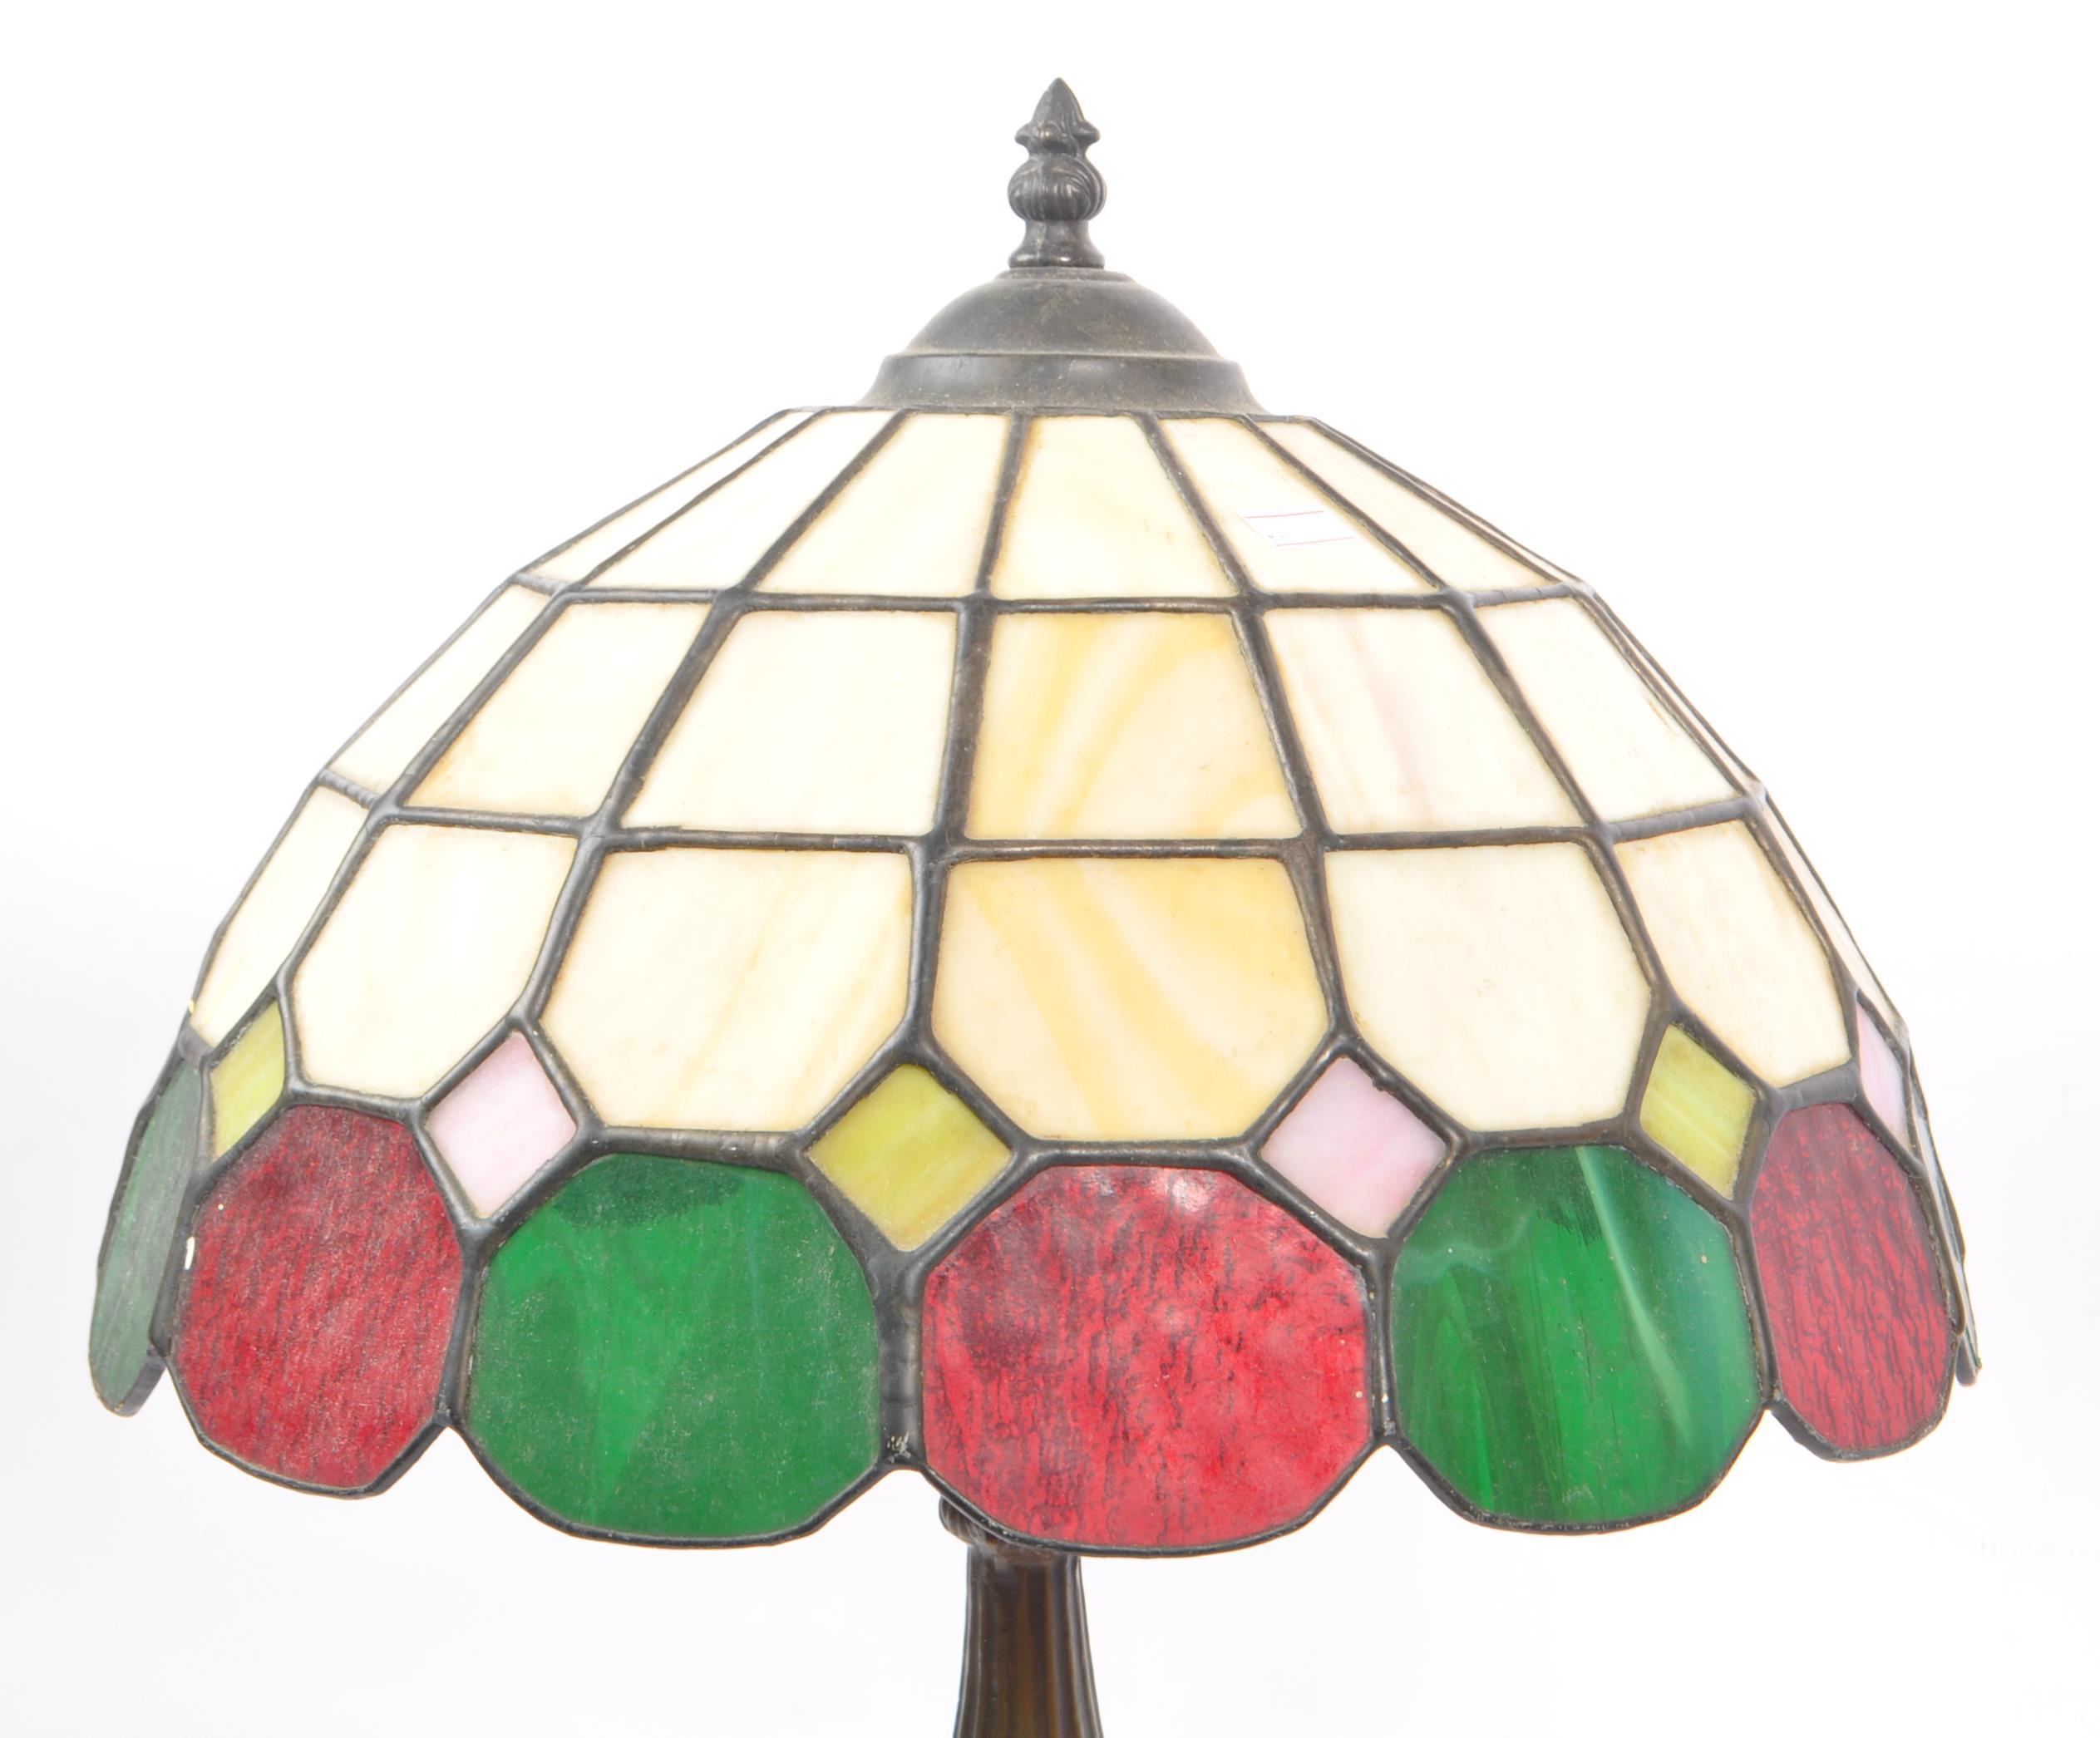 TIFFANY STYLE - 20TH CENTURY TIFFANY STYLE BISTRO TABLE LAMP - Image 3 of 5